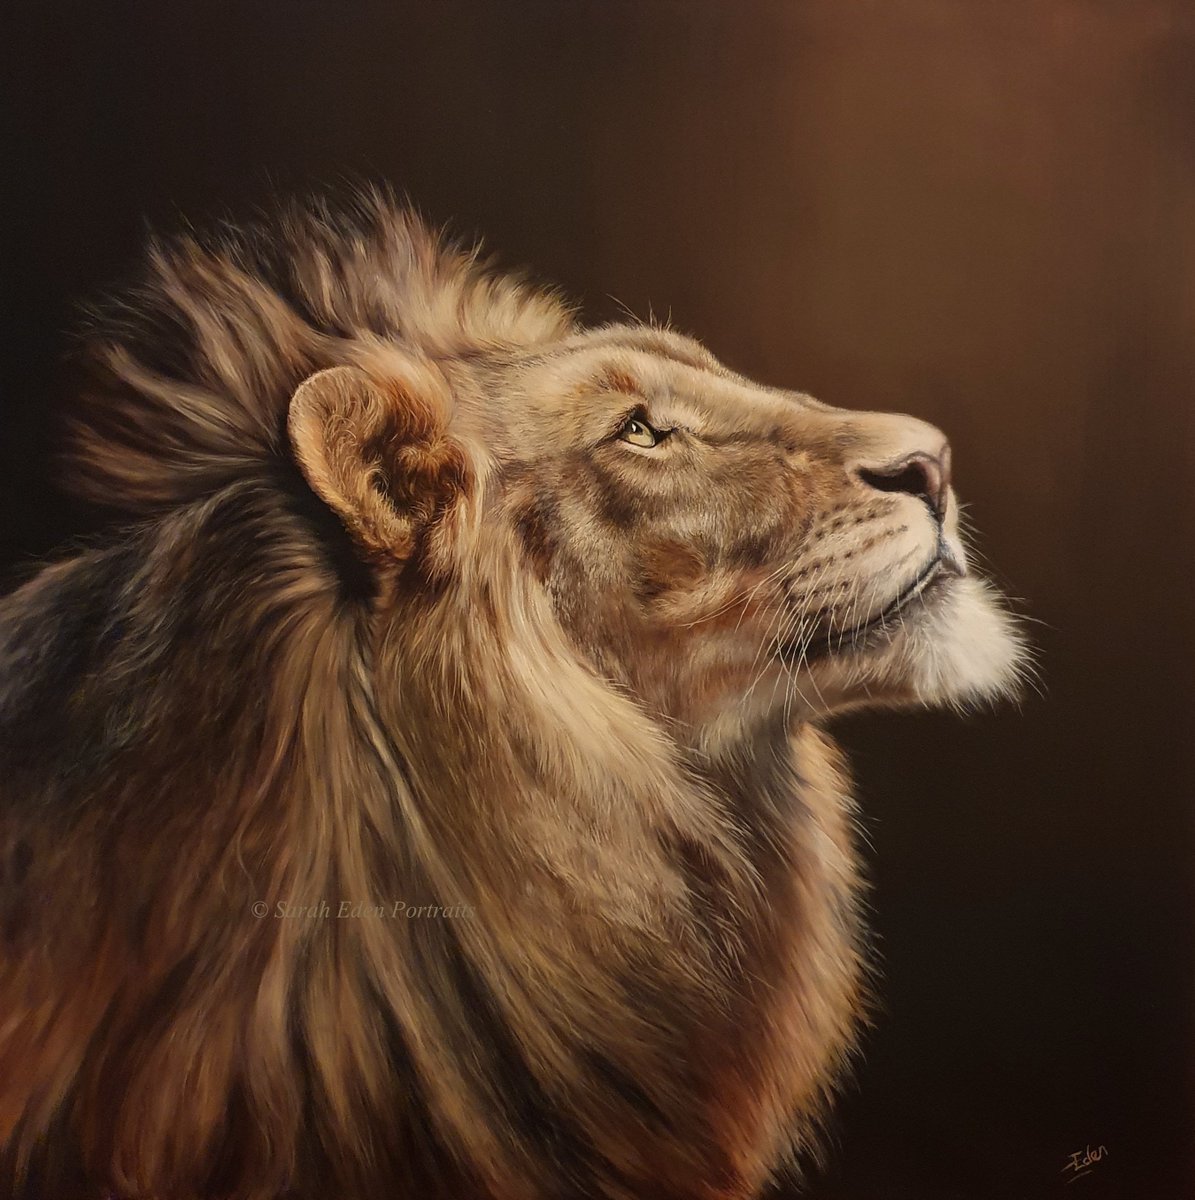 Well, I think I may have finally finished my beautiful lion! I hope you all like him and please feel free to share, share, share!!
Photo ref: Connie Lemperle

'John I: Into The Light', oil on board, 20 x 20'

#lions #lionart #bigcats #wildlife #oilpainting #artforsale #buyart